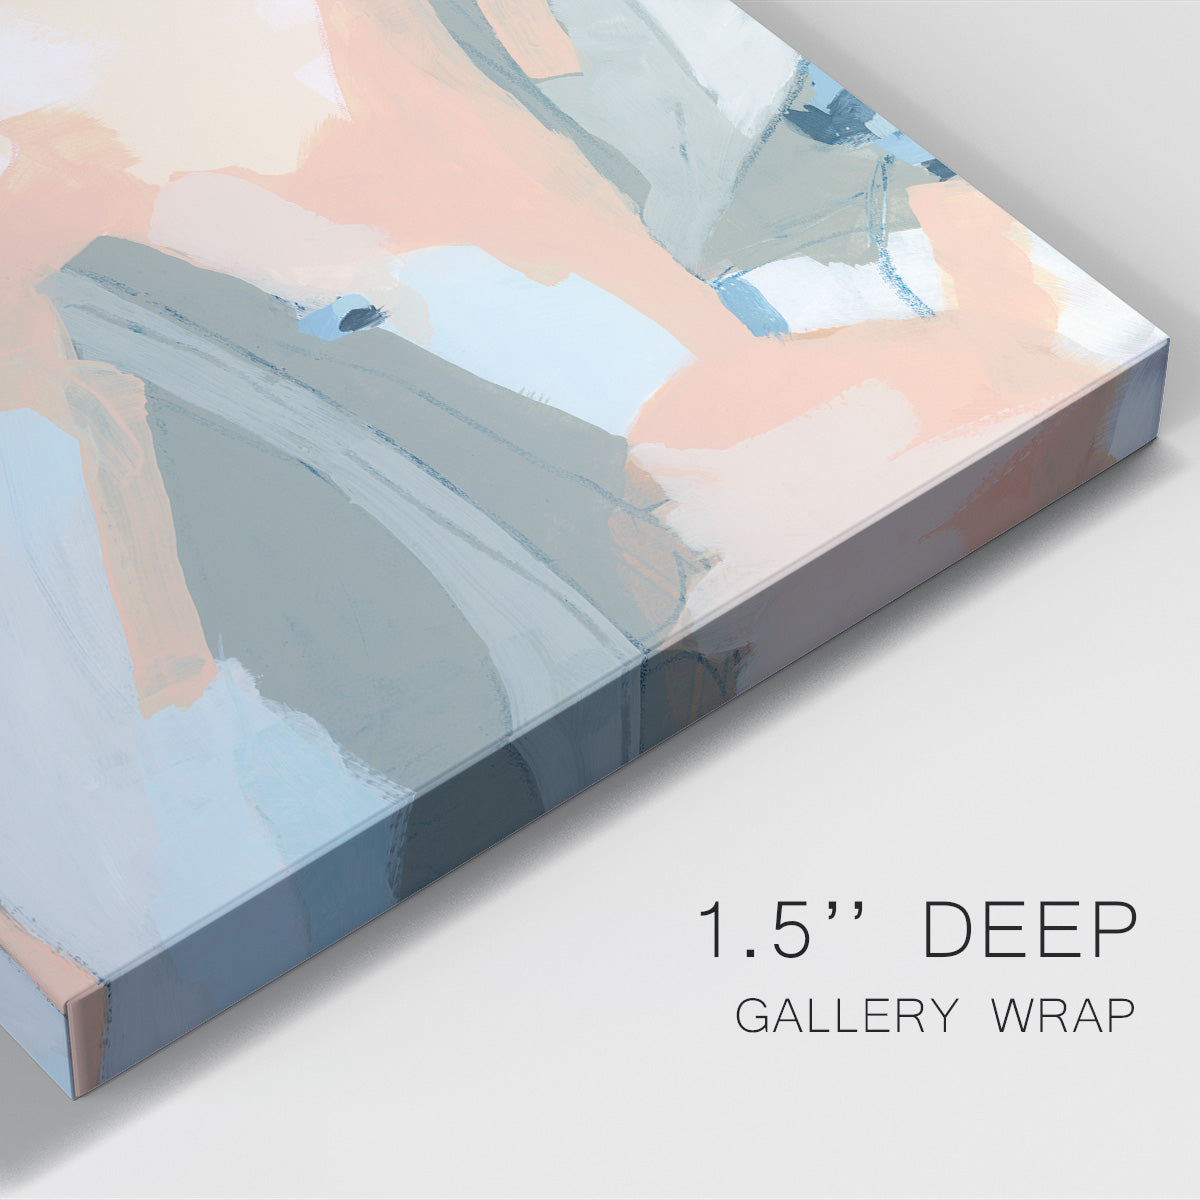 Pastel Cavern II Premium Gallery Wrapped Canvas - Ready to Hang